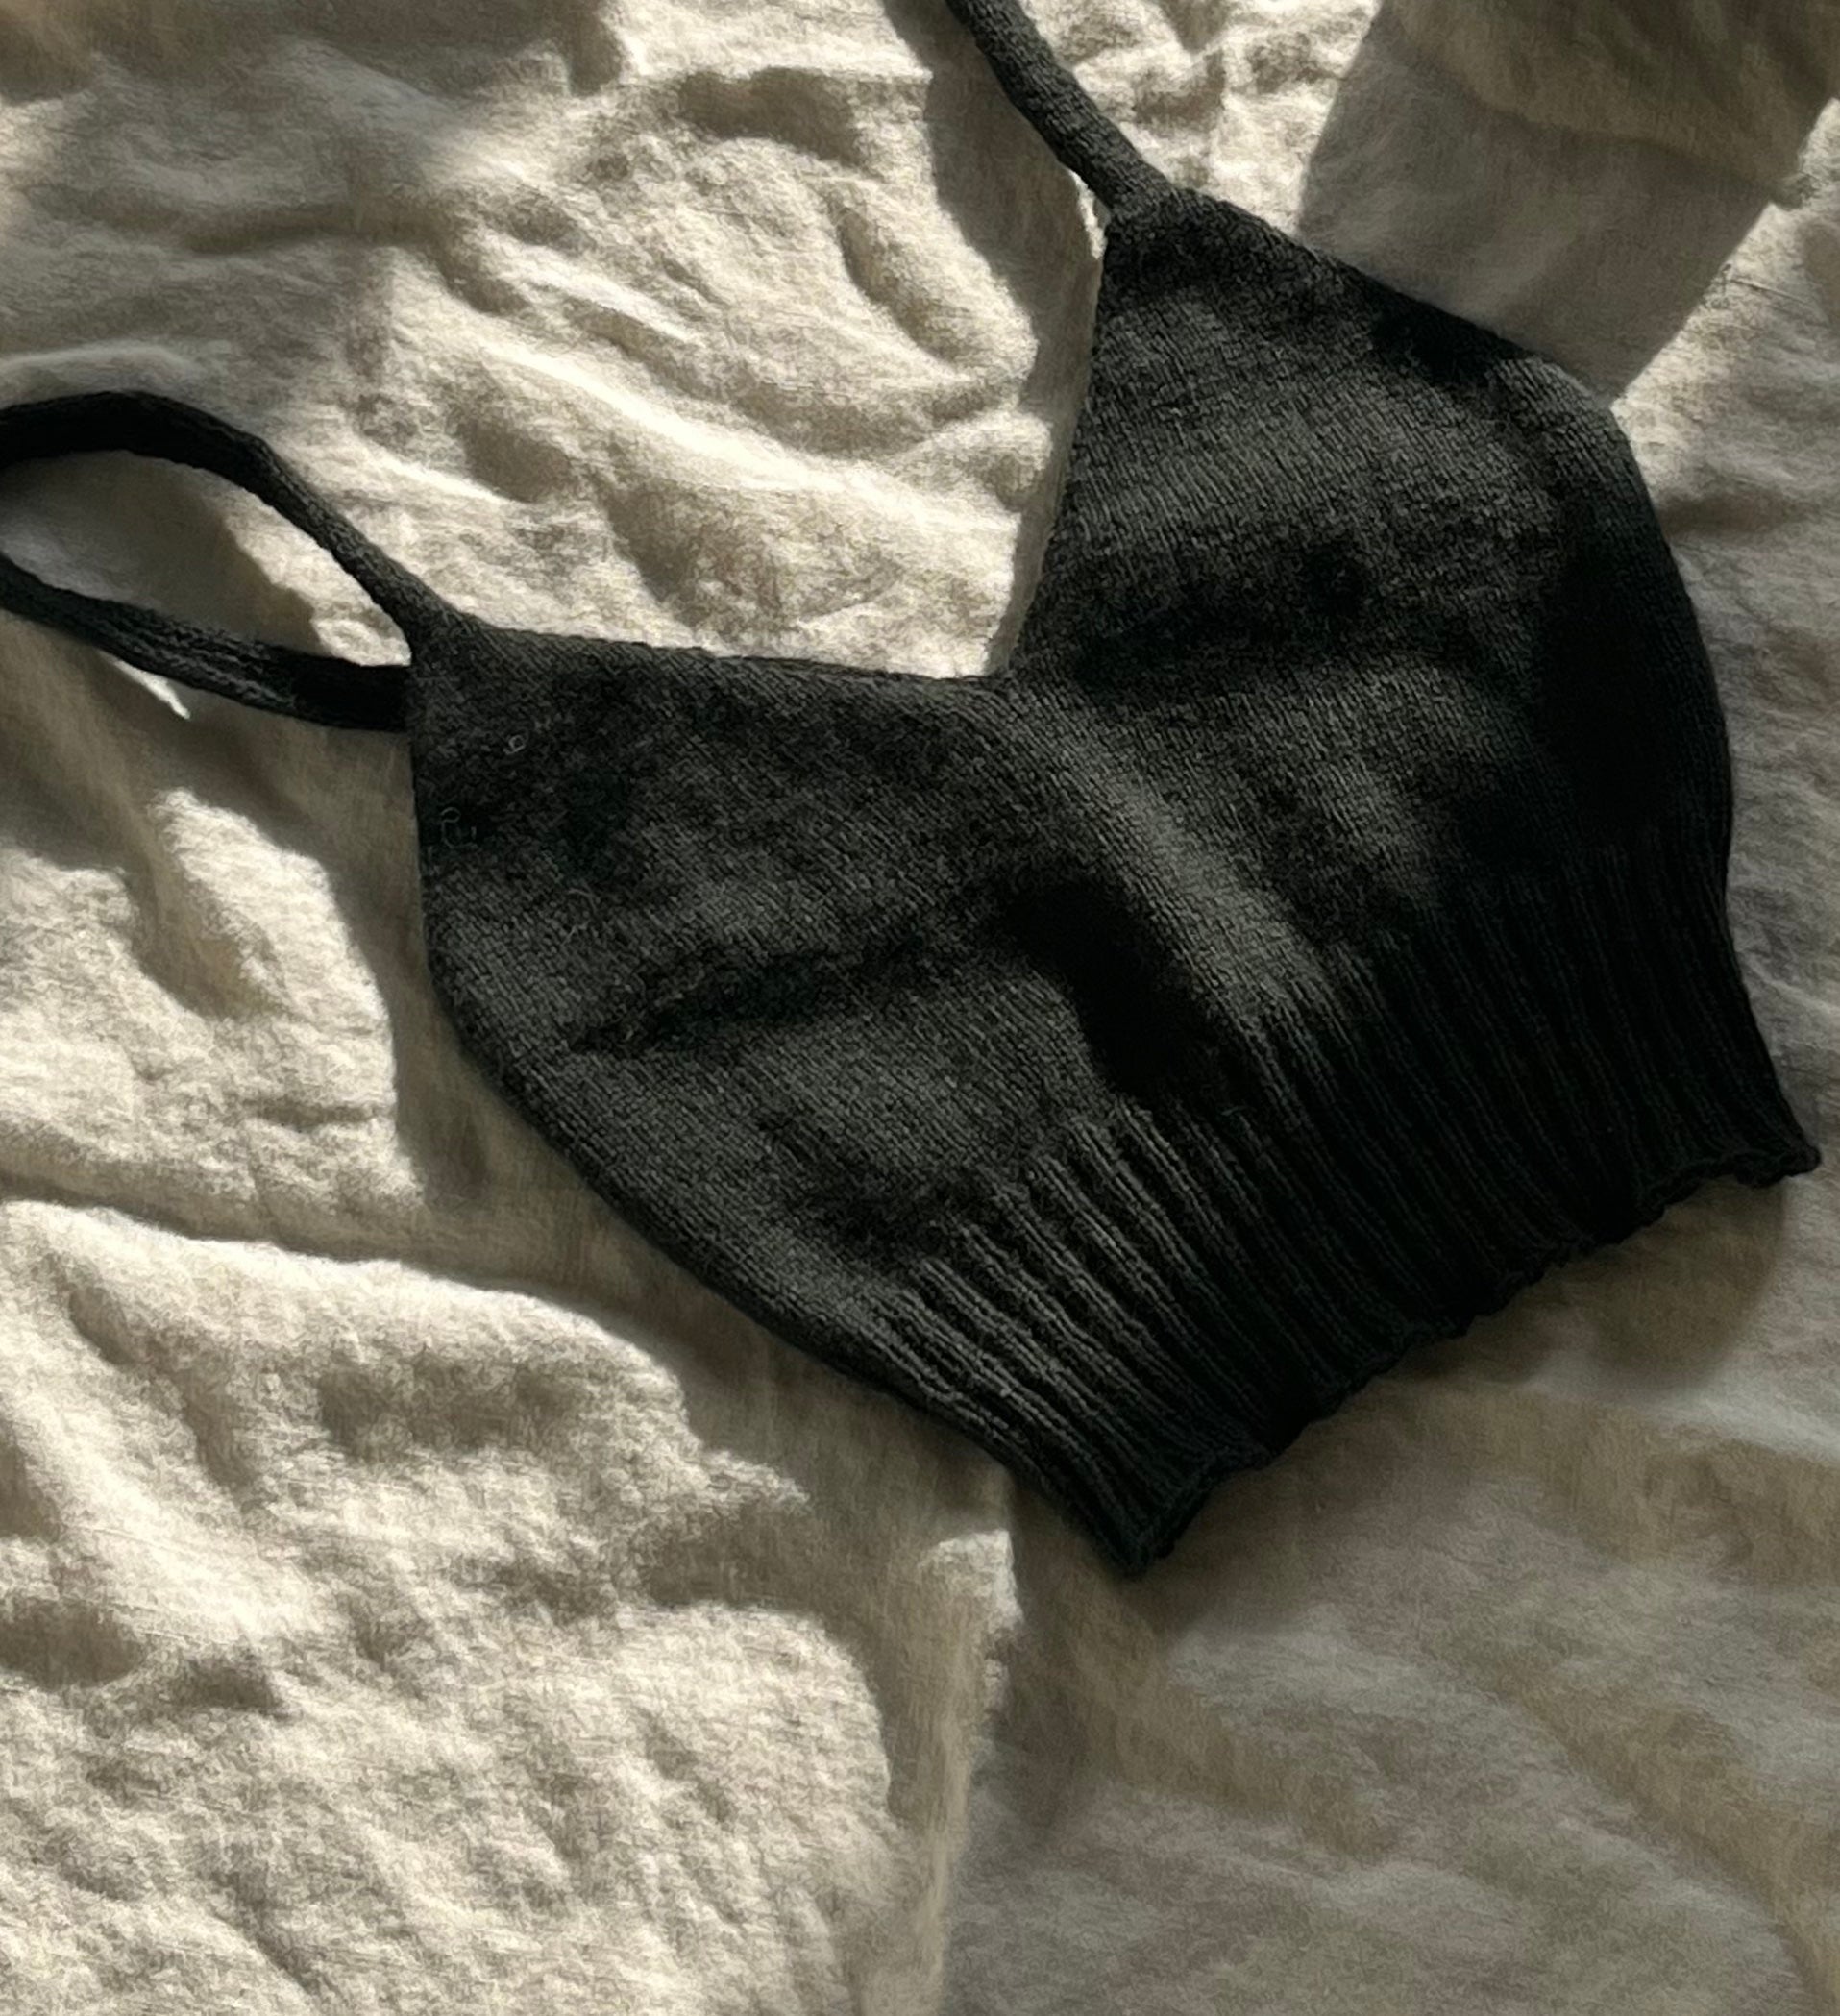 Knitted Solid Triangle Bralette - Cider